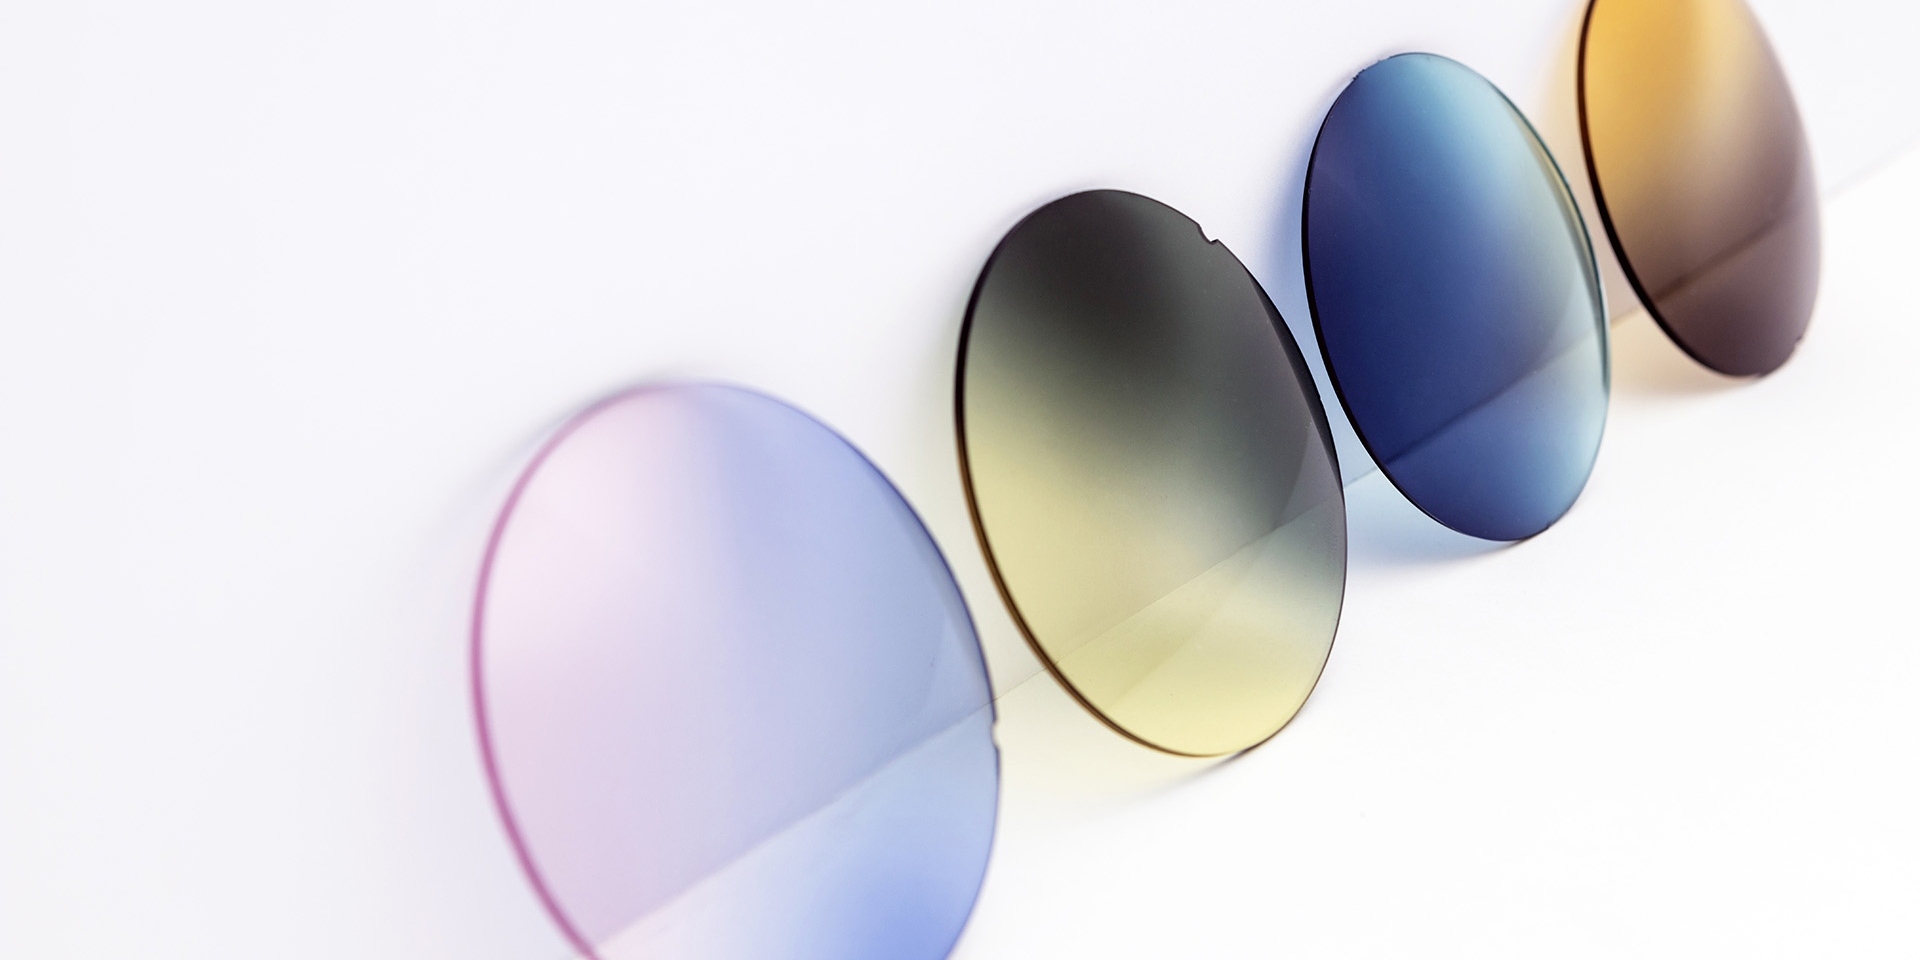 Different coloured sunglass lenses leaning against a white surface: pink-purple, yellow-grey, blue and brown gradients.